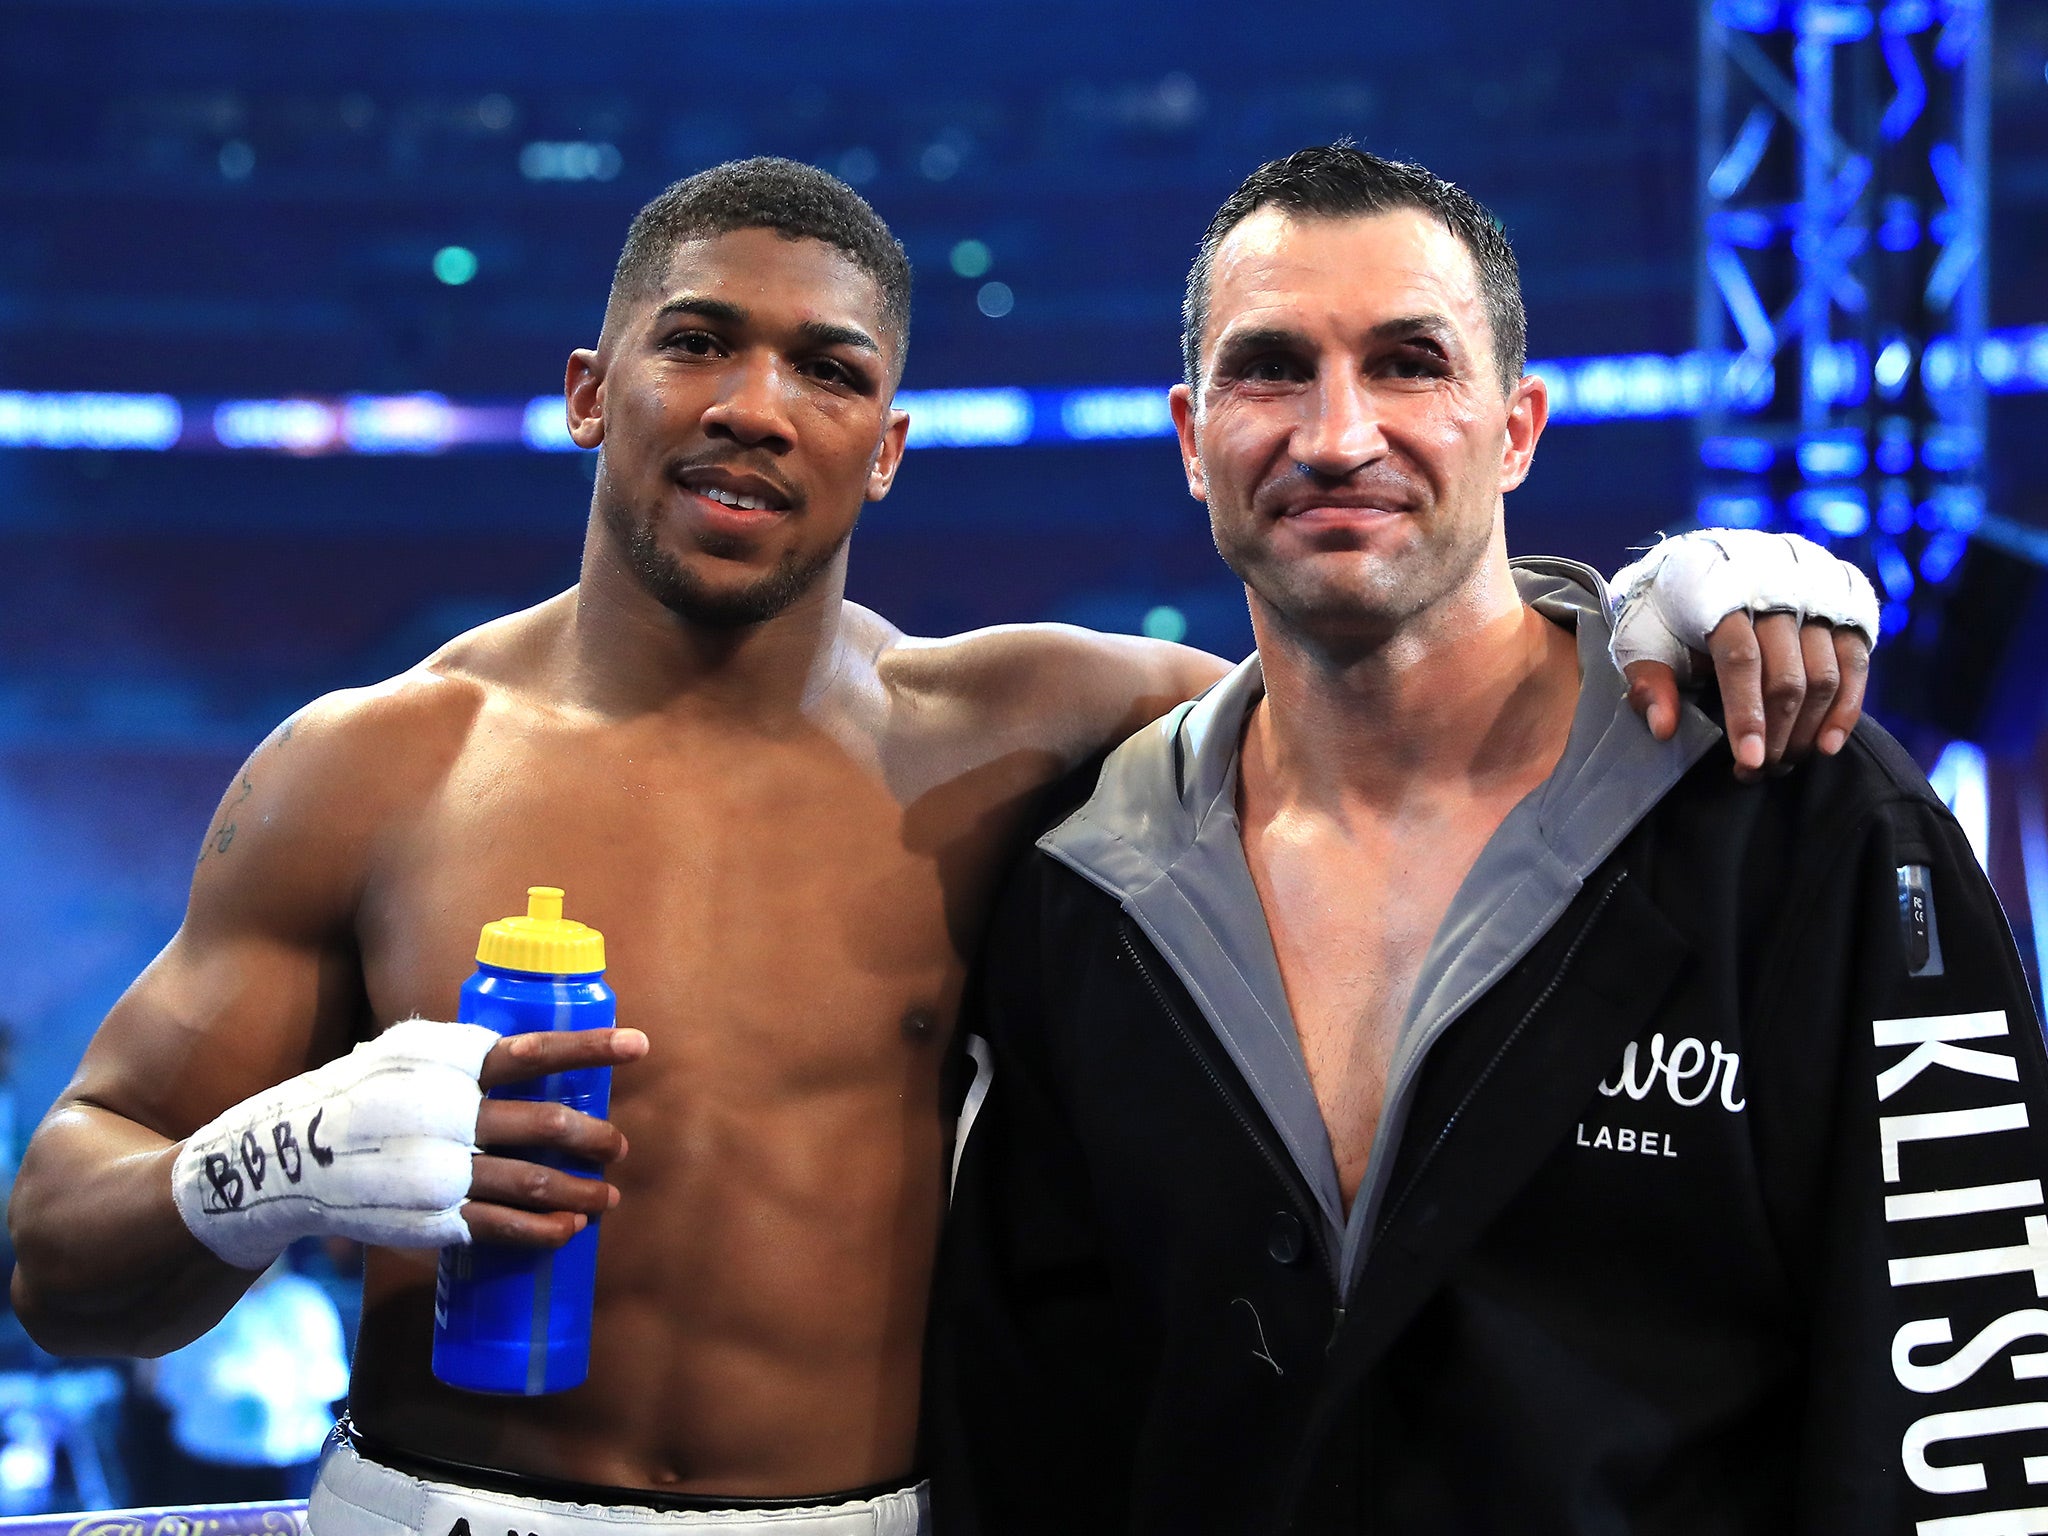 Joshua has expressed an interest in fighting on the undercard